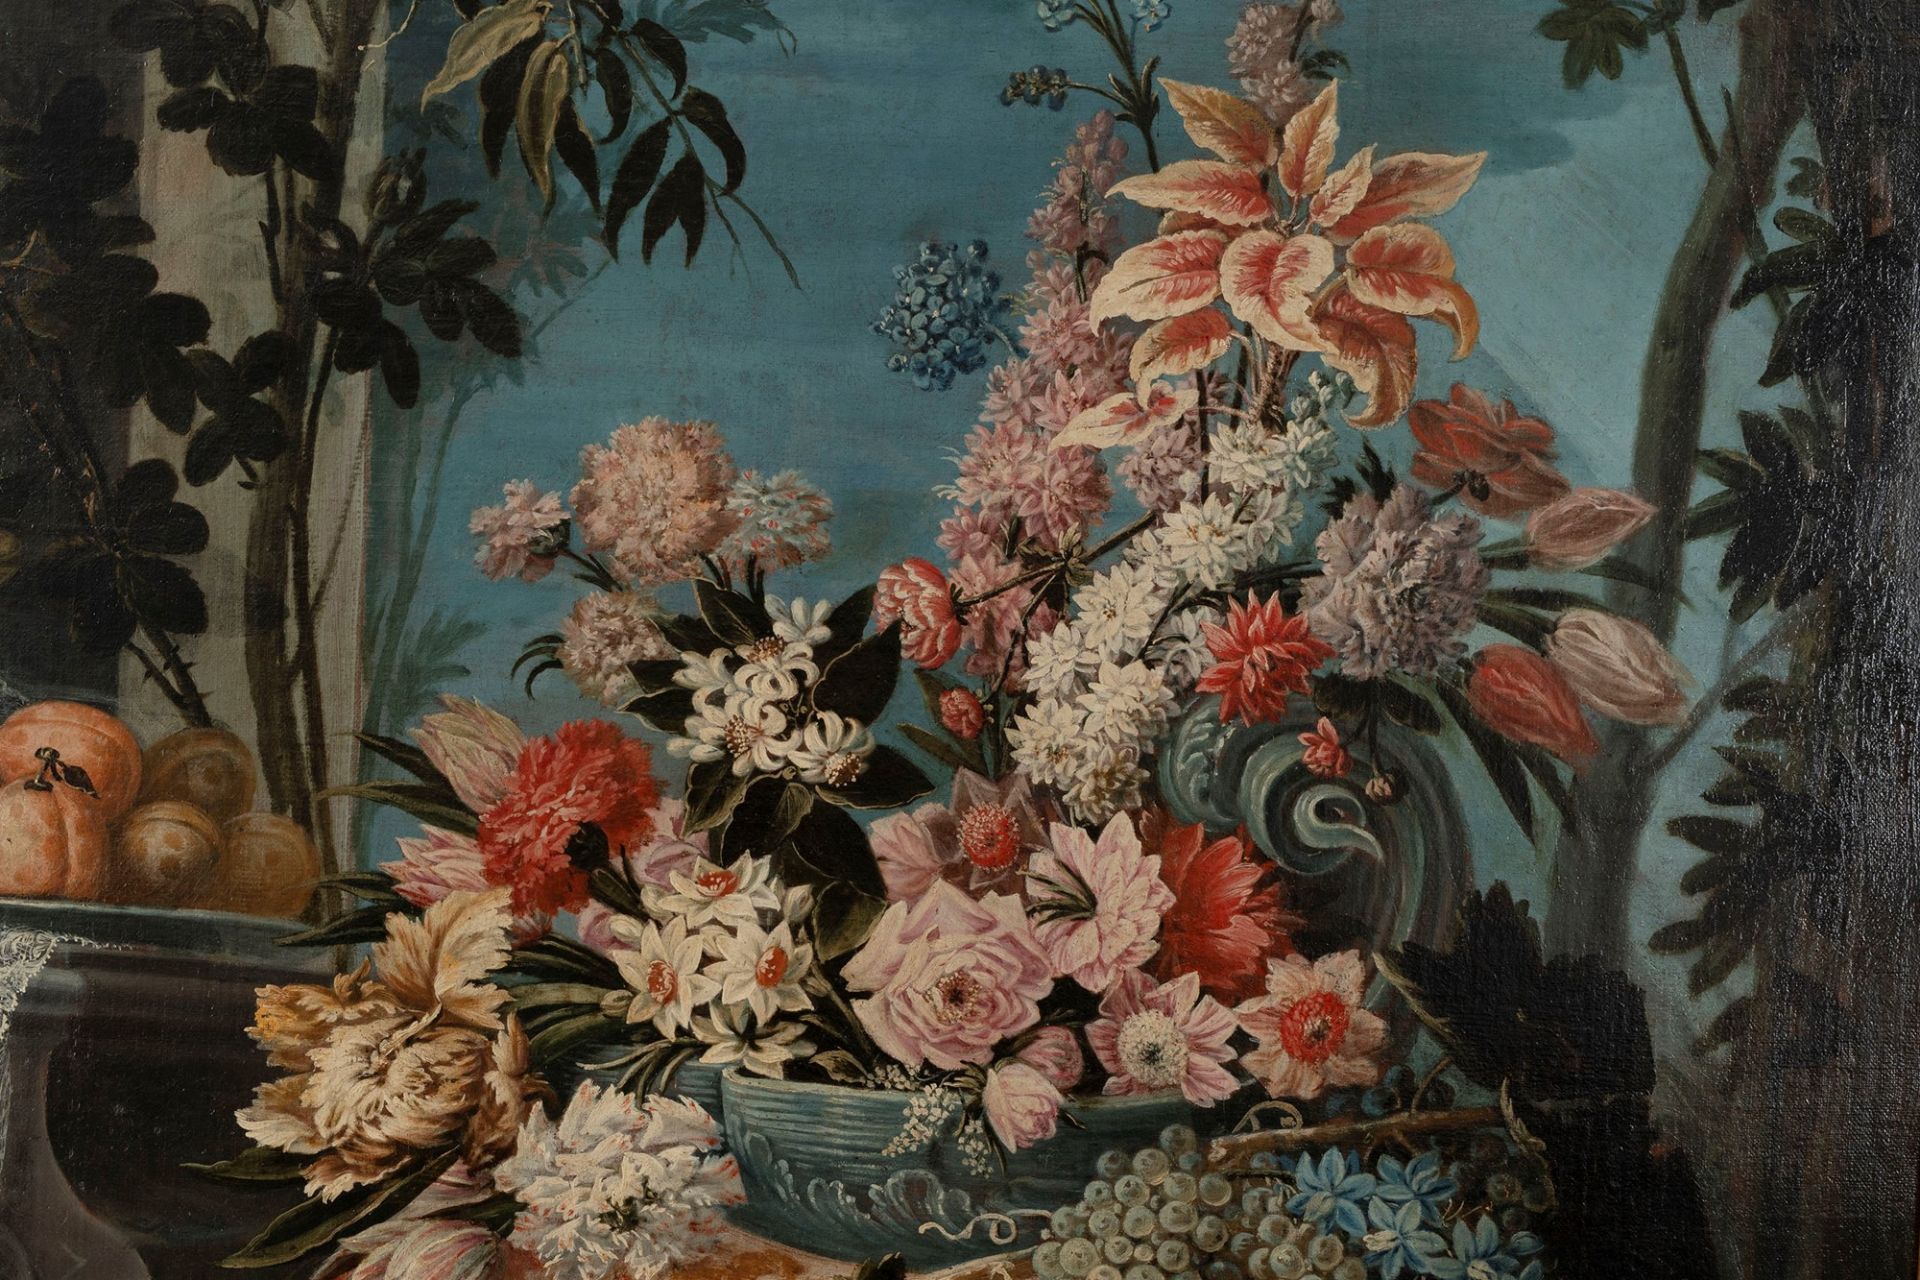 Lombard School, XVIII century - Flowers and fruit in an Italian garden with bunnies and parrots - Image 5 of 8